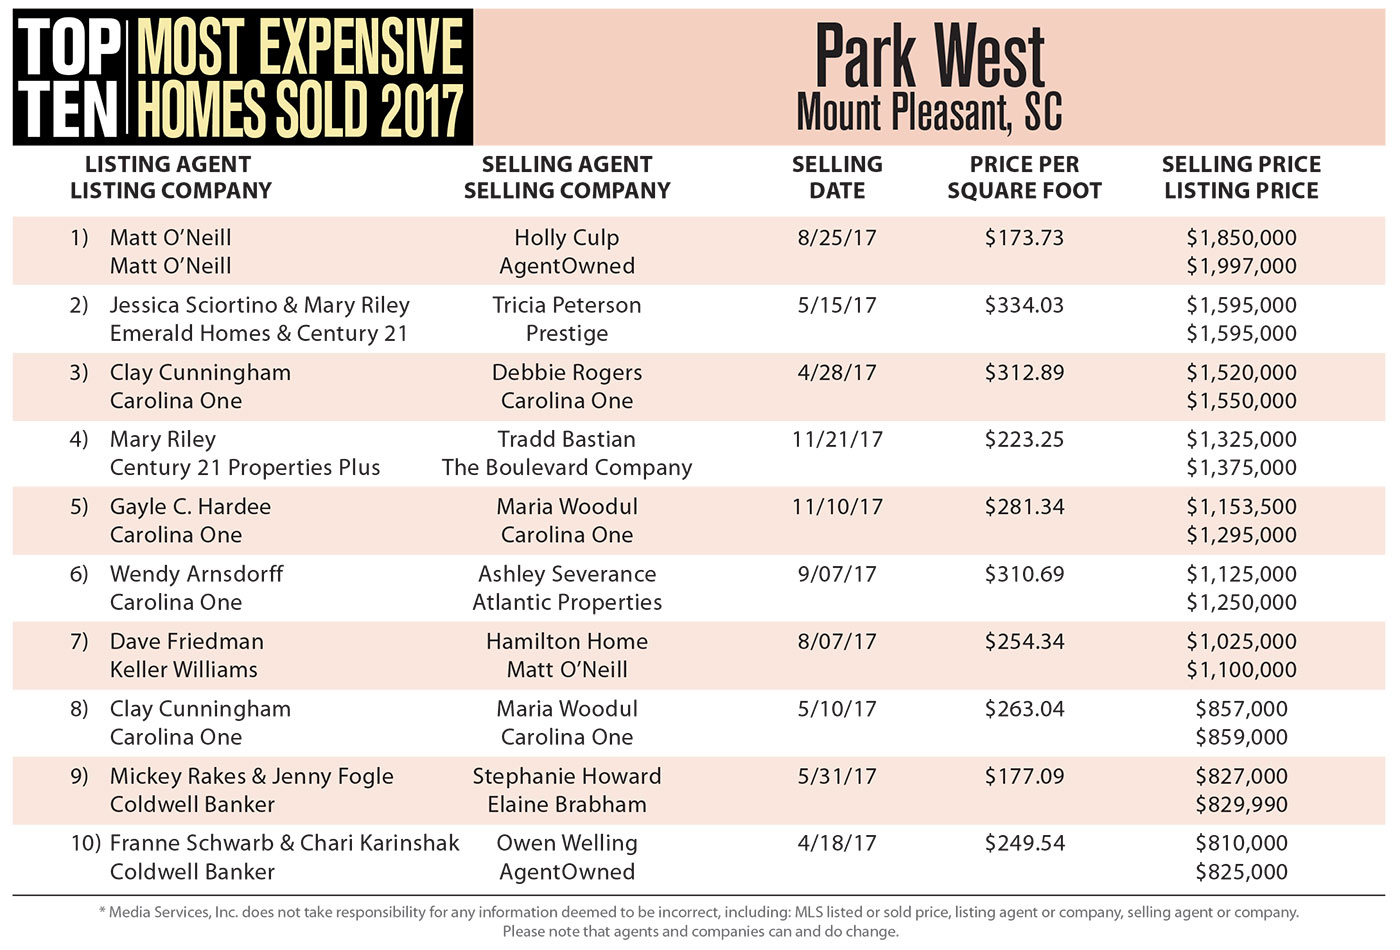 Park West Top Ten Most Expensive Homes Sold in 2017